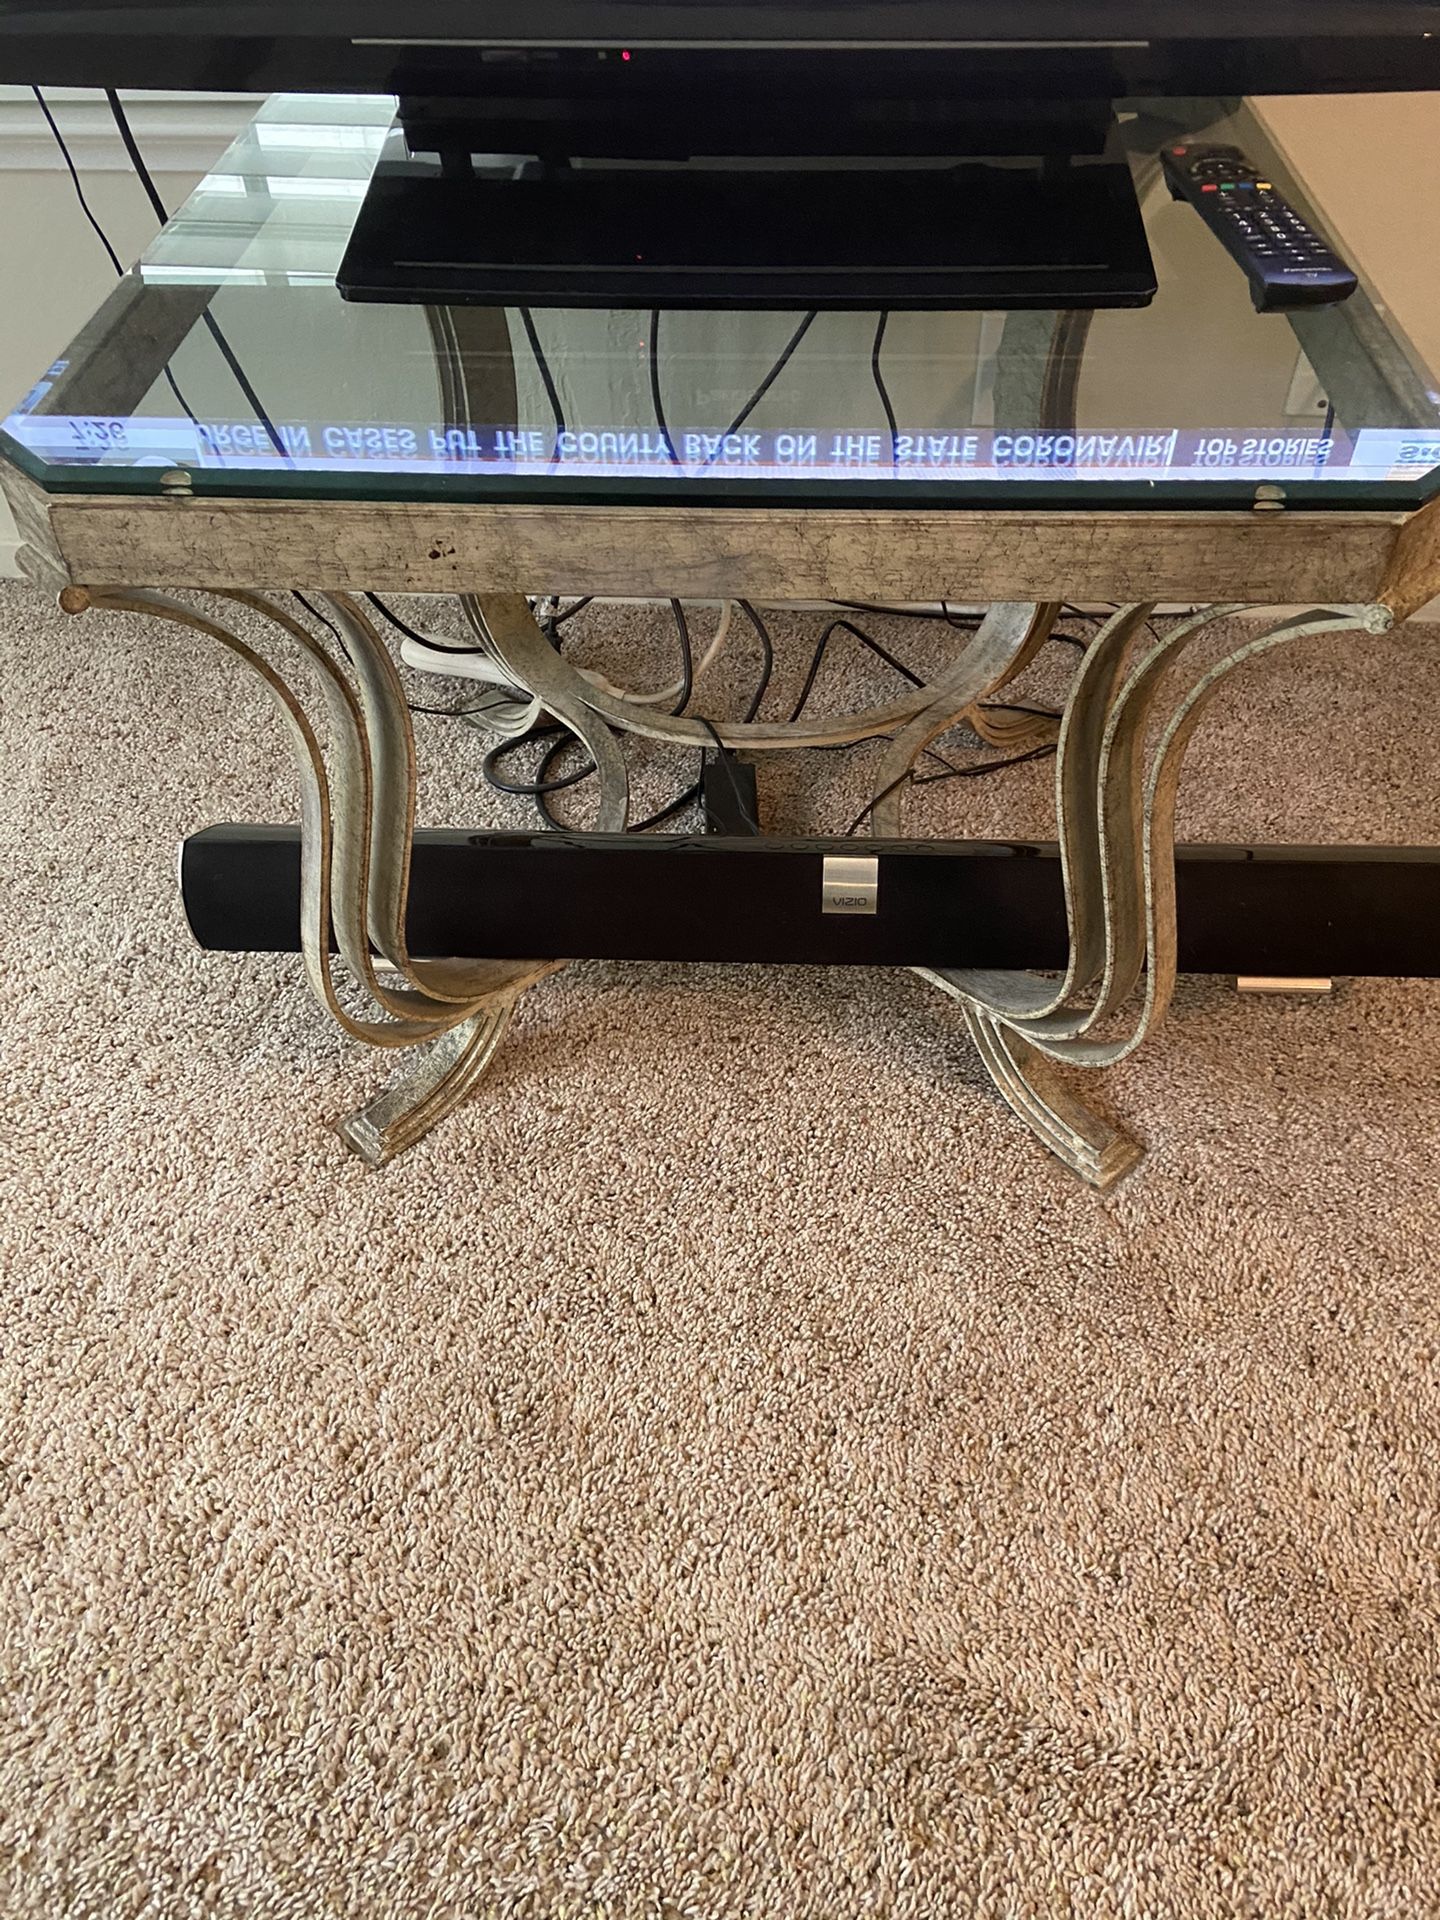 Bassett glass coffee table and end table.